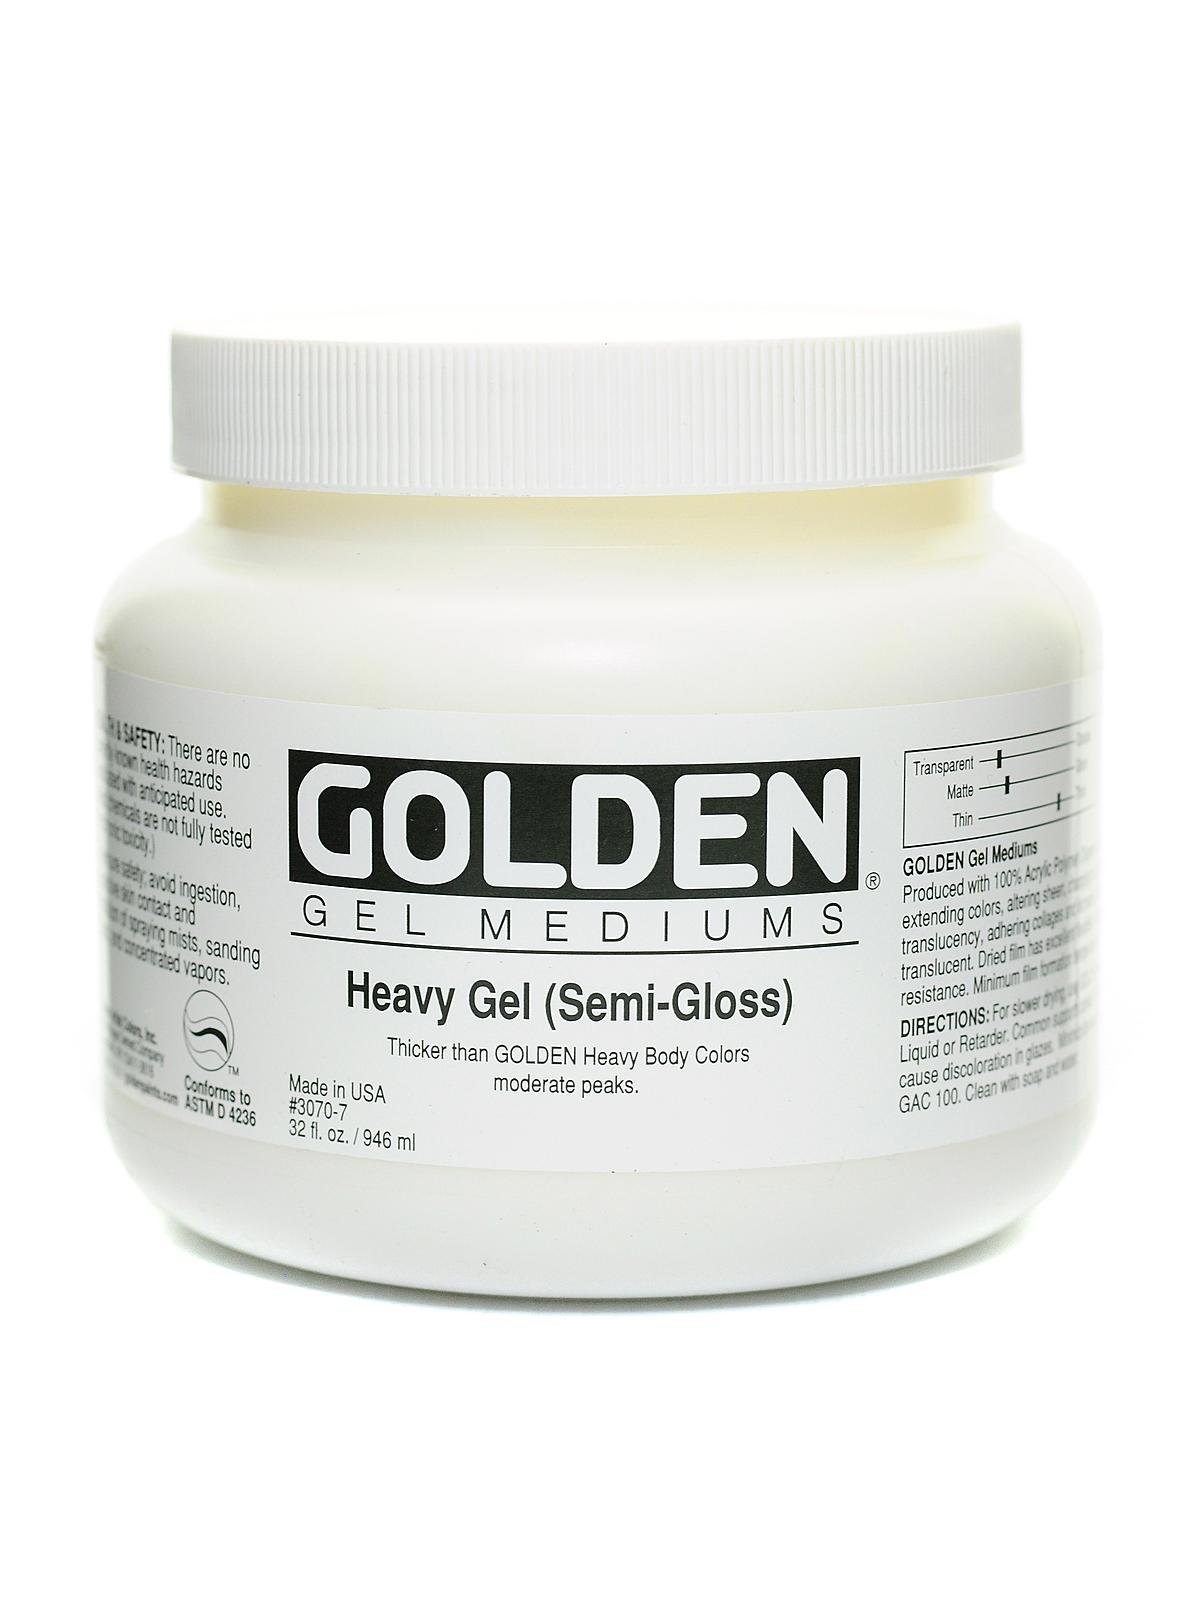 GOLDEN Gel Medium and Fluid Acrylics Featured in Spring Promotion,  Highlighting Product Versatility, Endless Possibilities